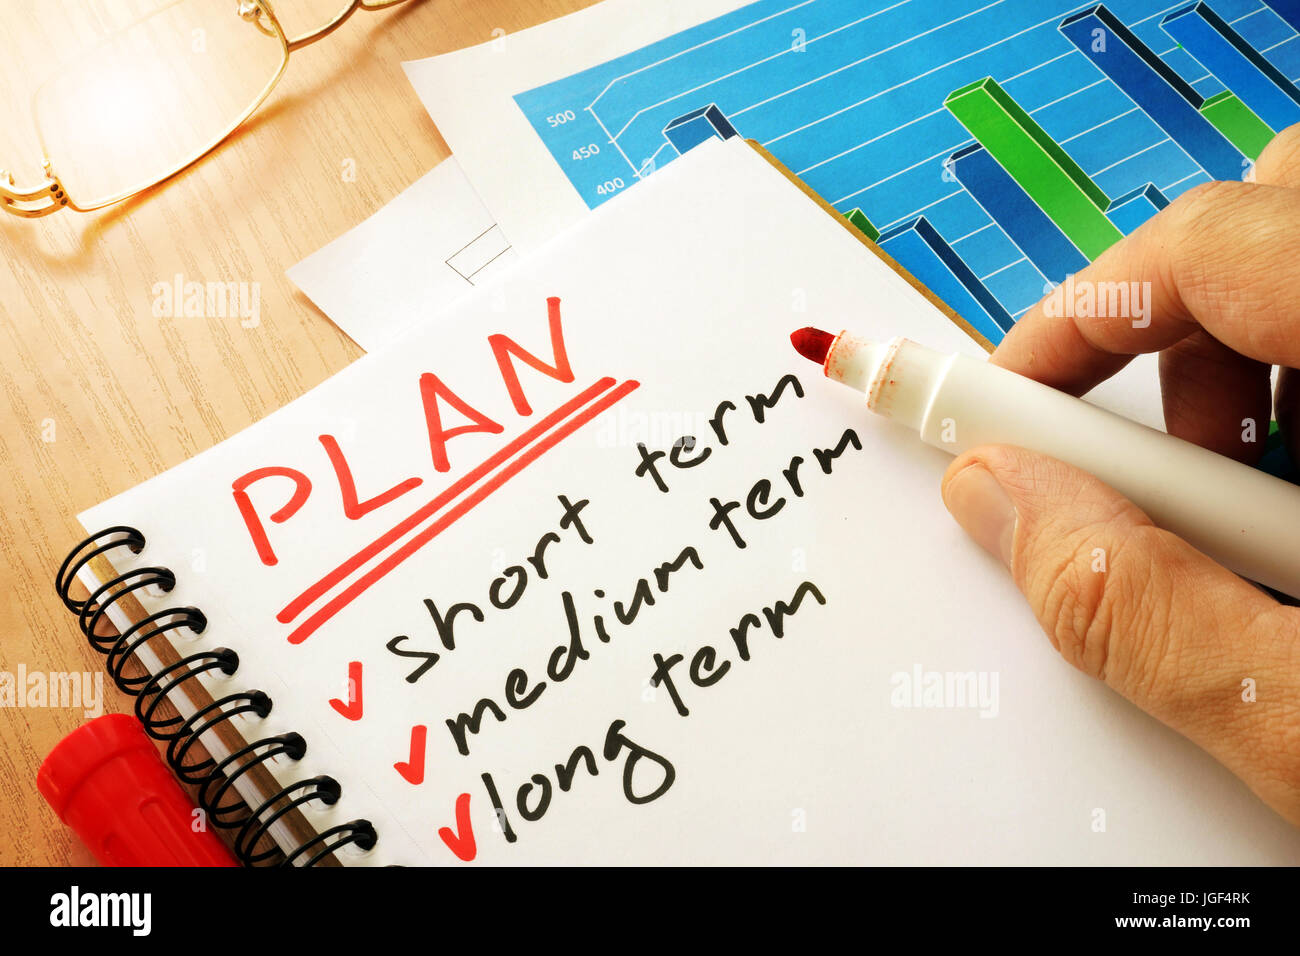 Plan with list short, medium and long term. Stock Photo